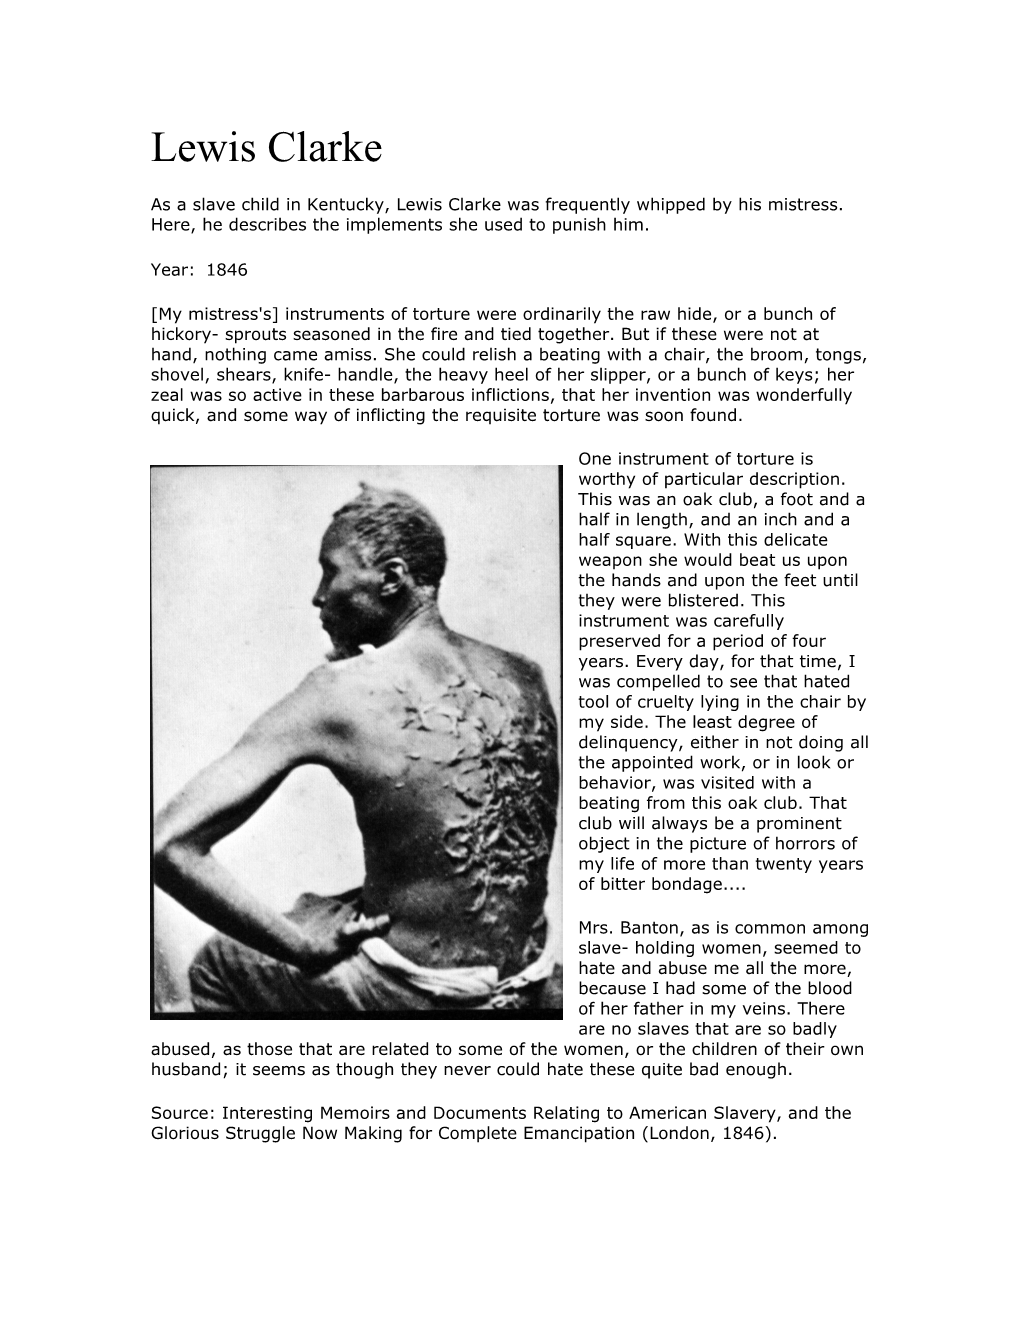 As a Slave Child in Kentucky, Lewis Clarke Was Frequently Whipped by His Mistress. Here